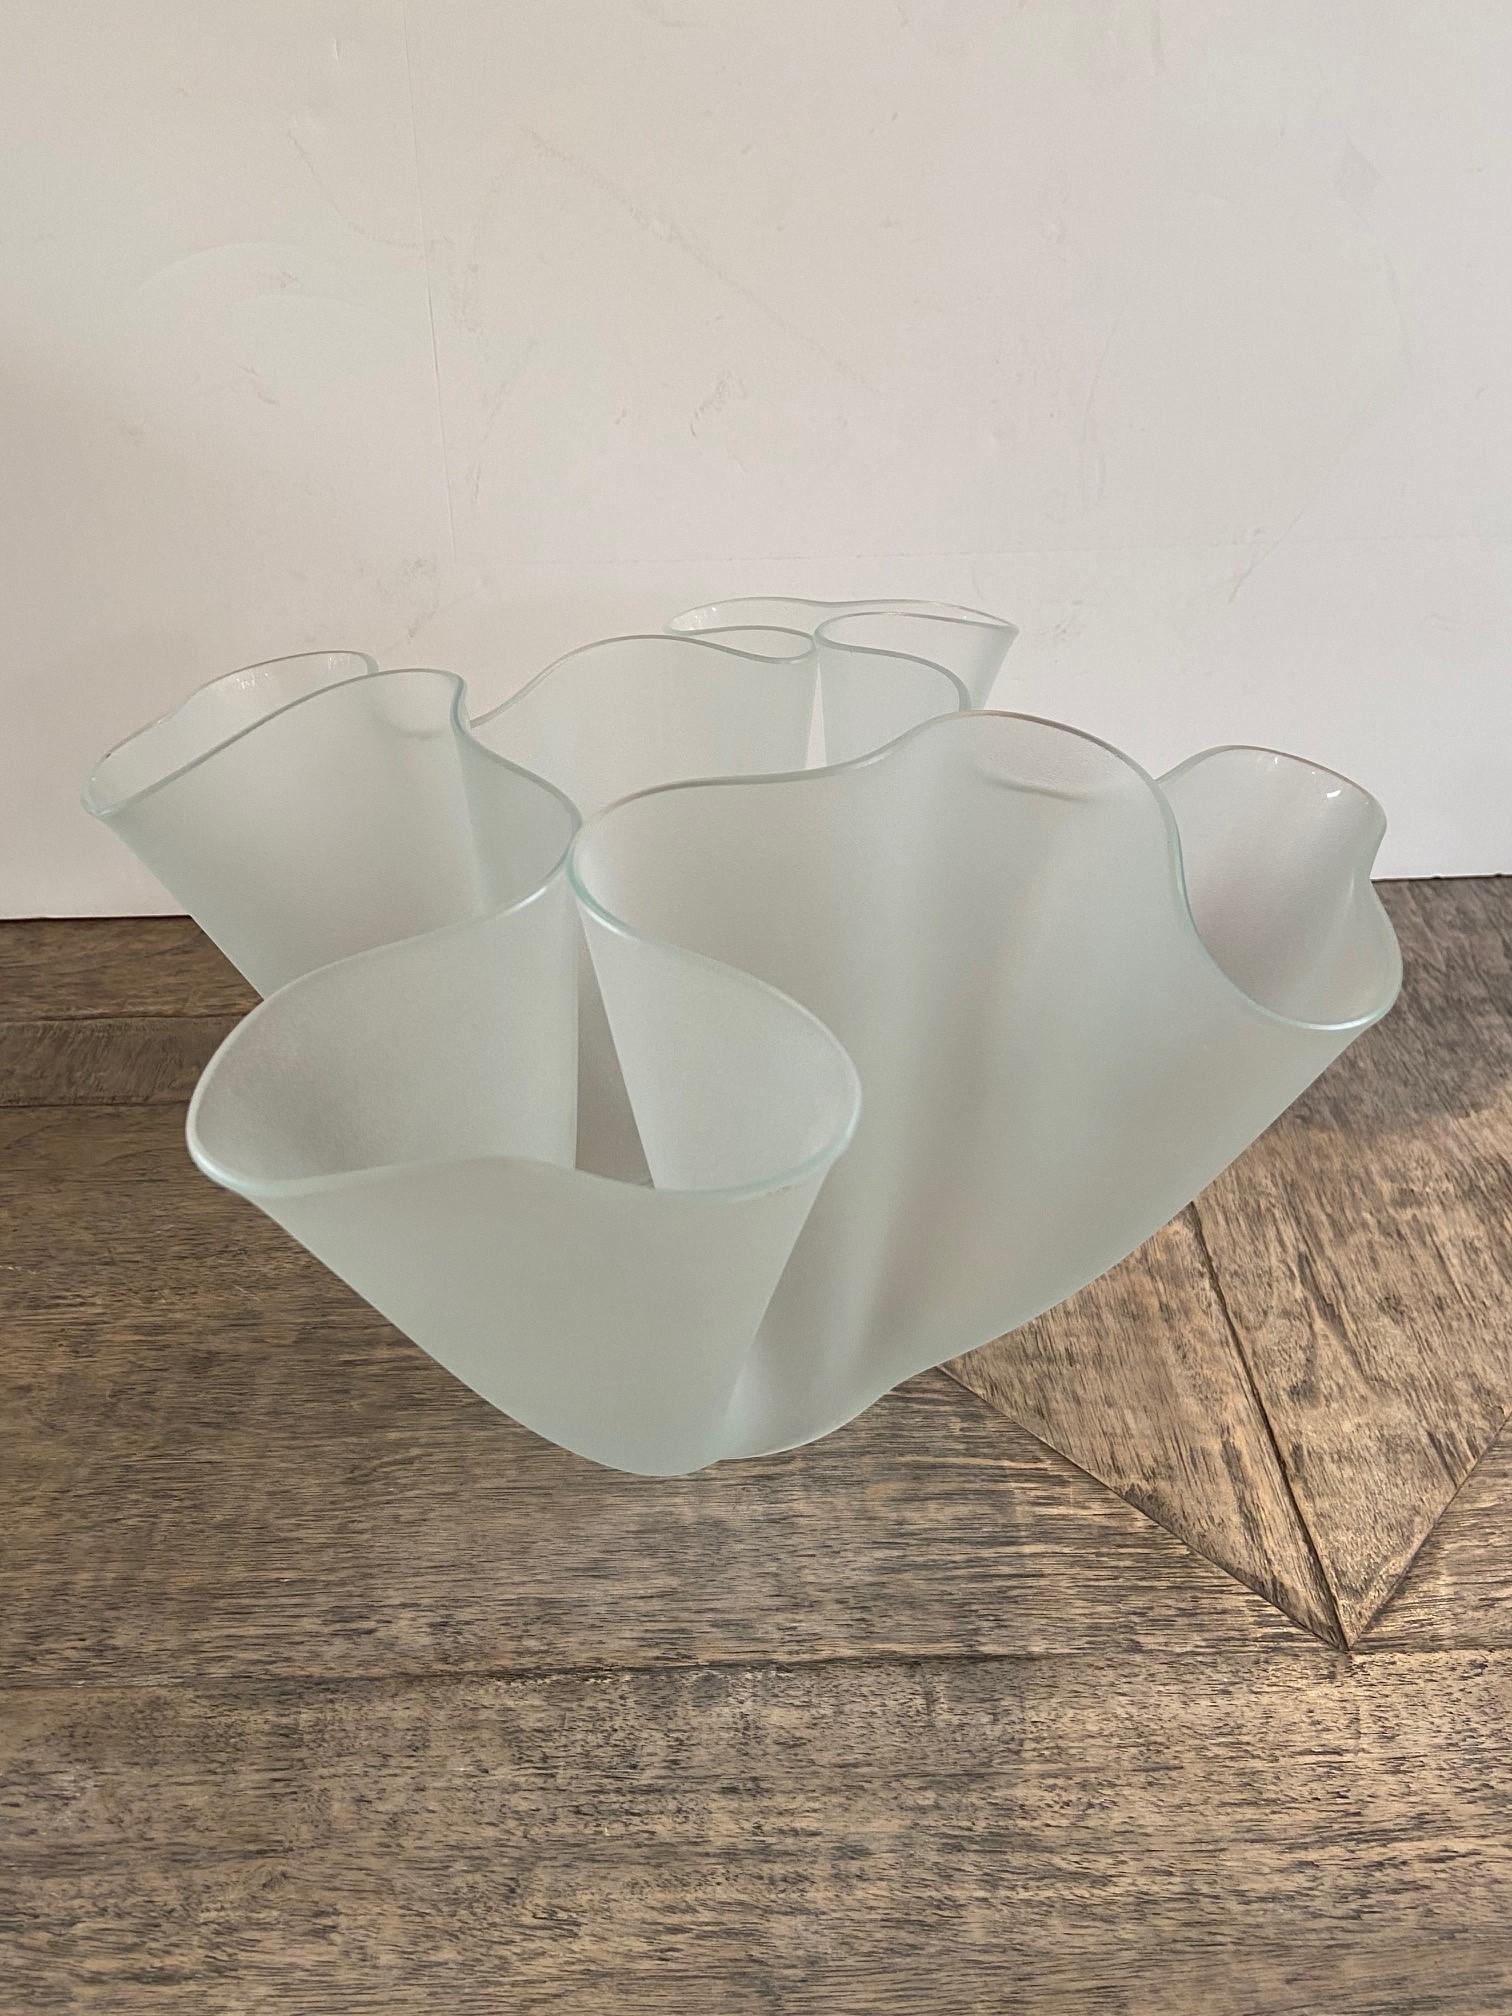 Extraordinary vase sculpture with original box designed by Pietro Chiesa, made from hot folding of a sheet of glass 